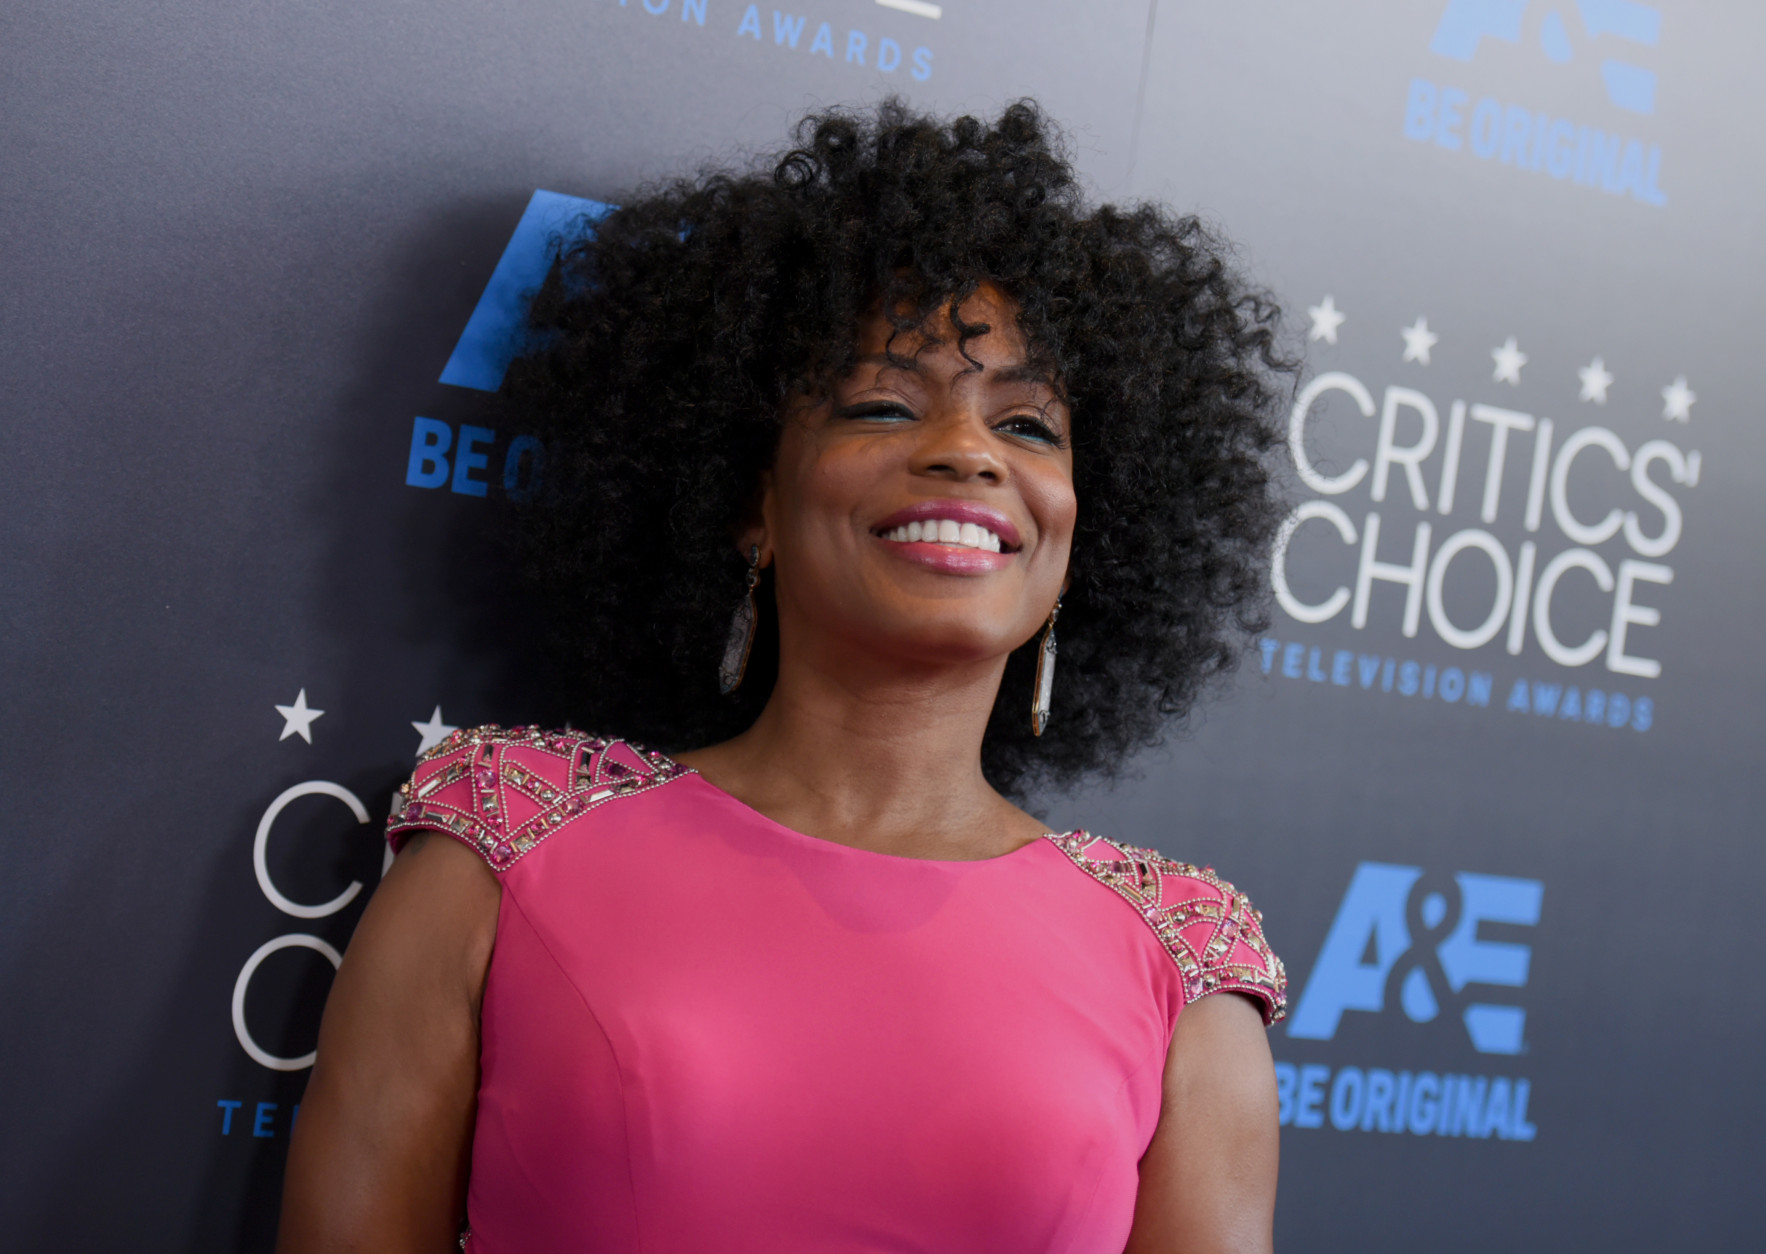 Aunjanue Ellis arrives at the Critics' Choice Television Awards at the Beverly Hilton hotel on Sunday, May 31, 2015, in Beverly Hills, Calif. (Photo by Richard Shotwell/Invision/AP)